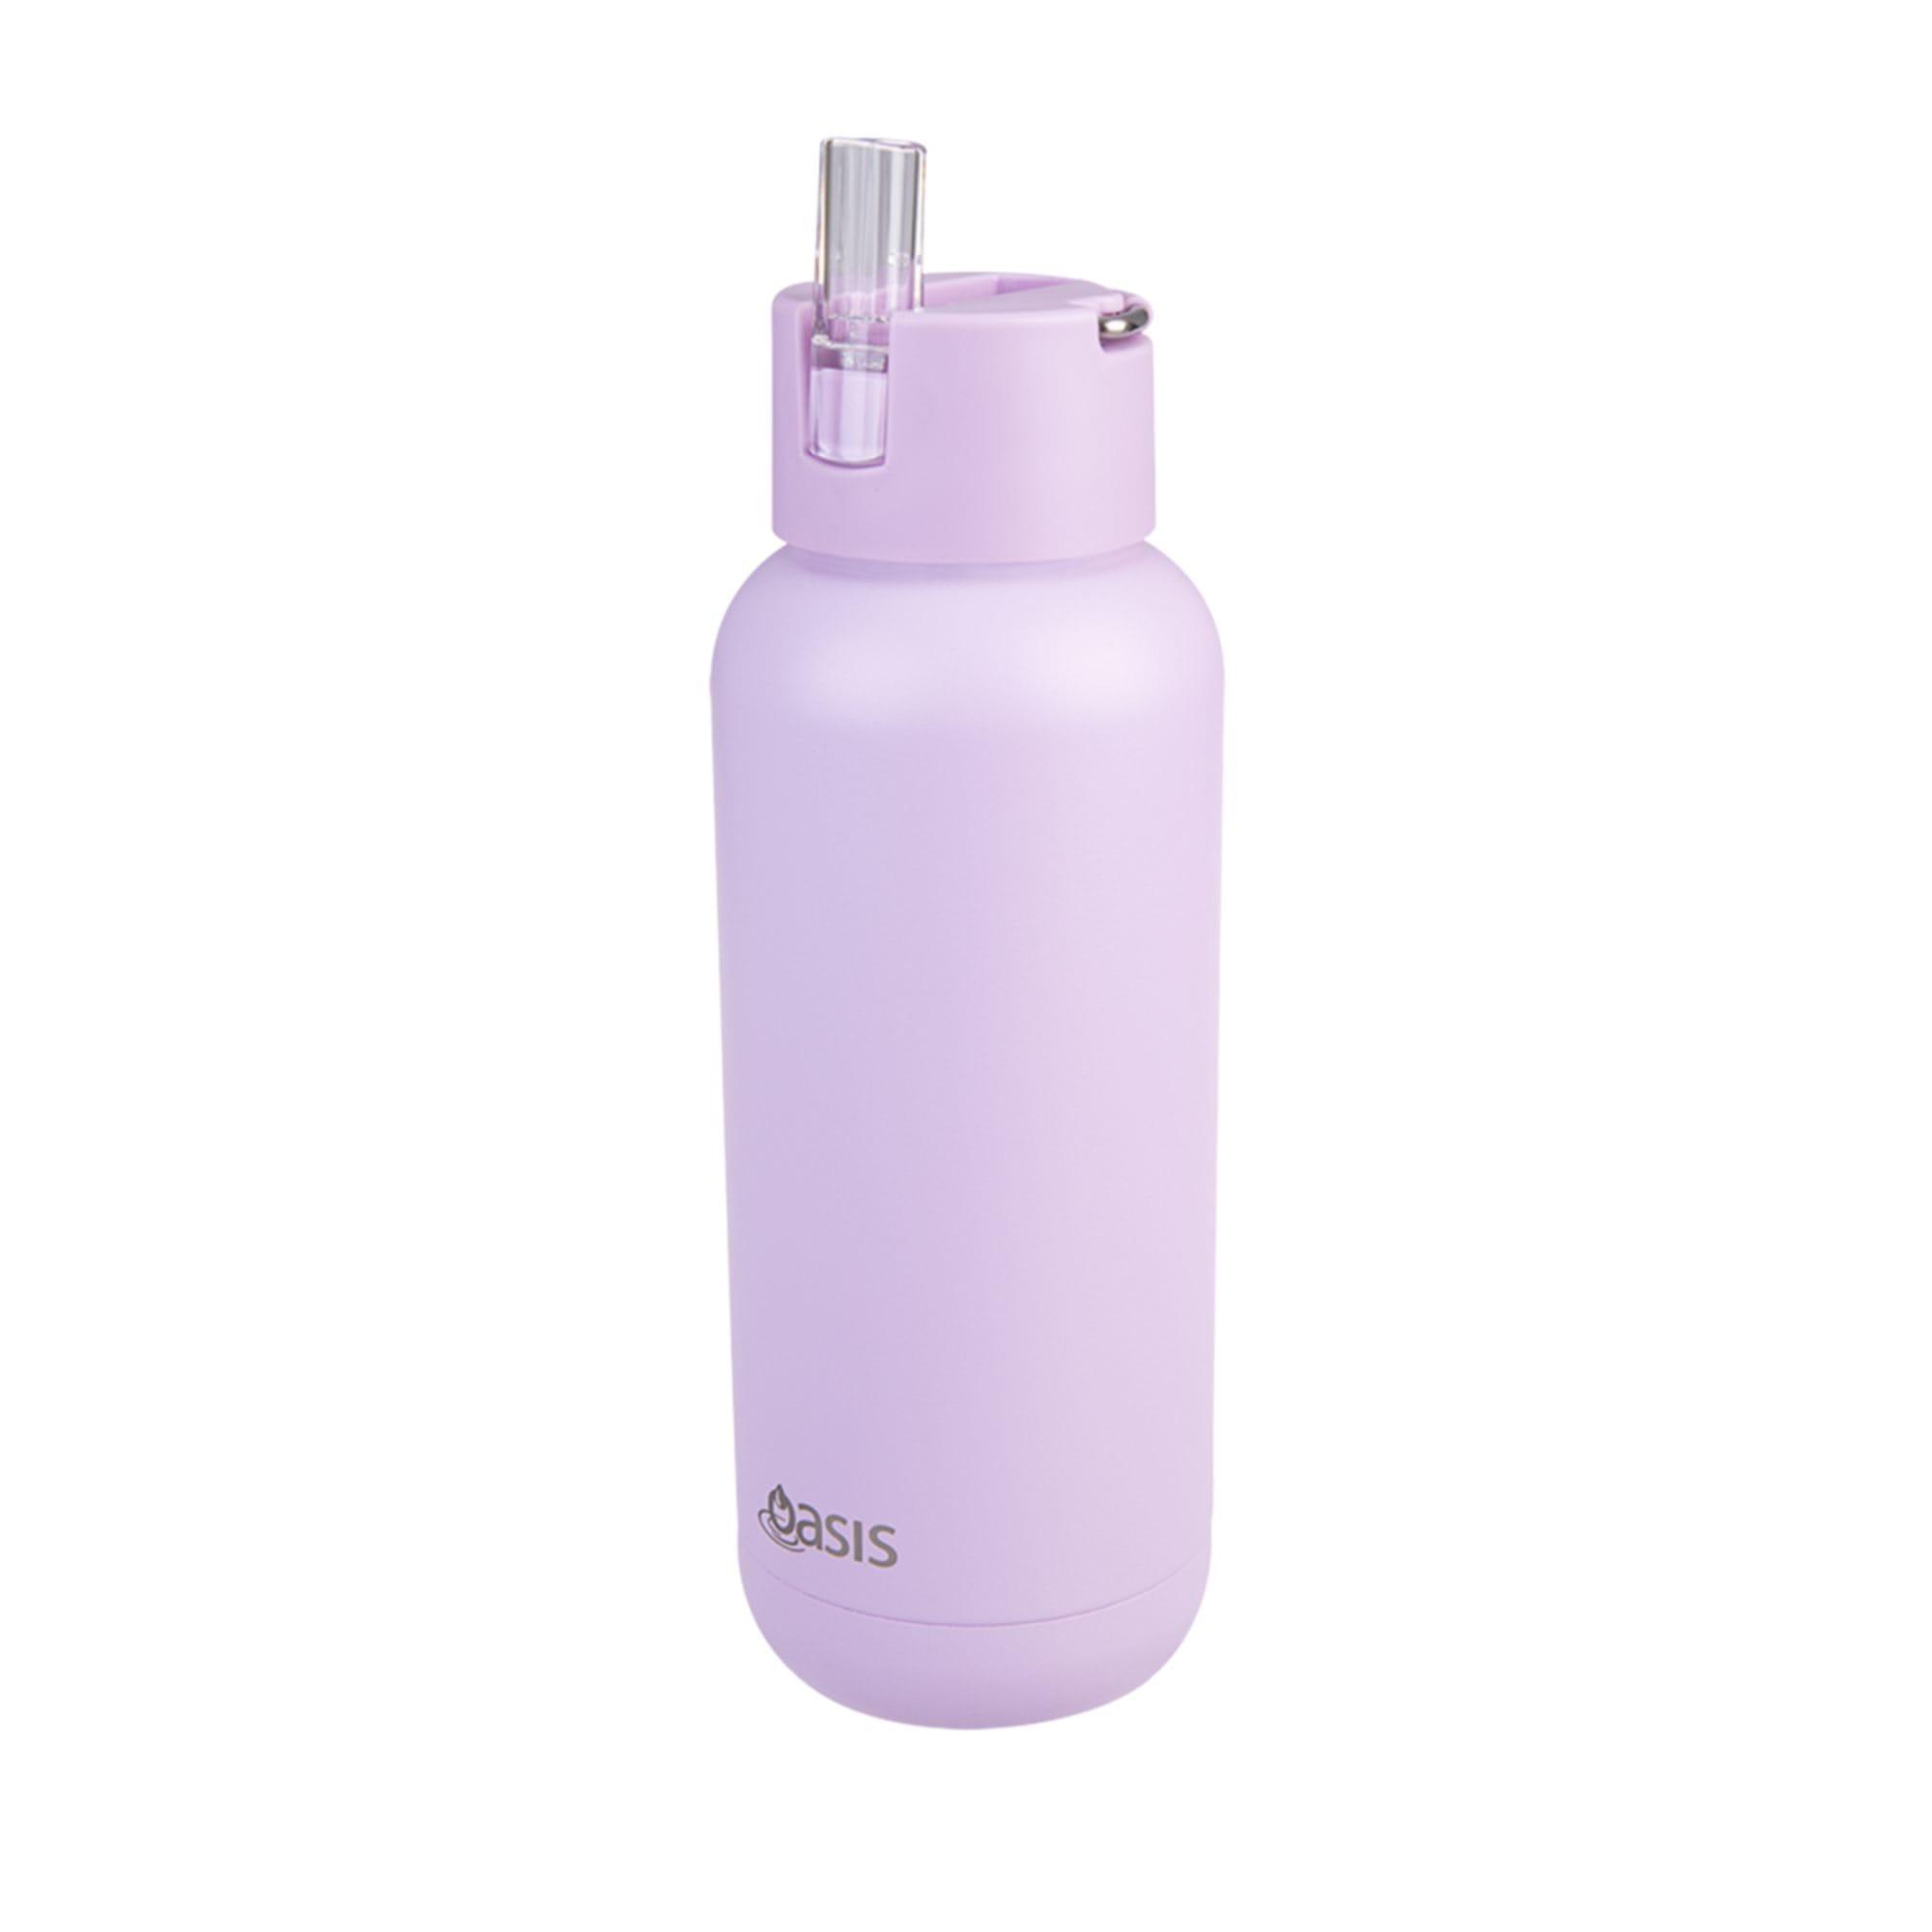 Oasis Moda Triple Wall Insulated Drink Bottle 1L Orchid Image 4